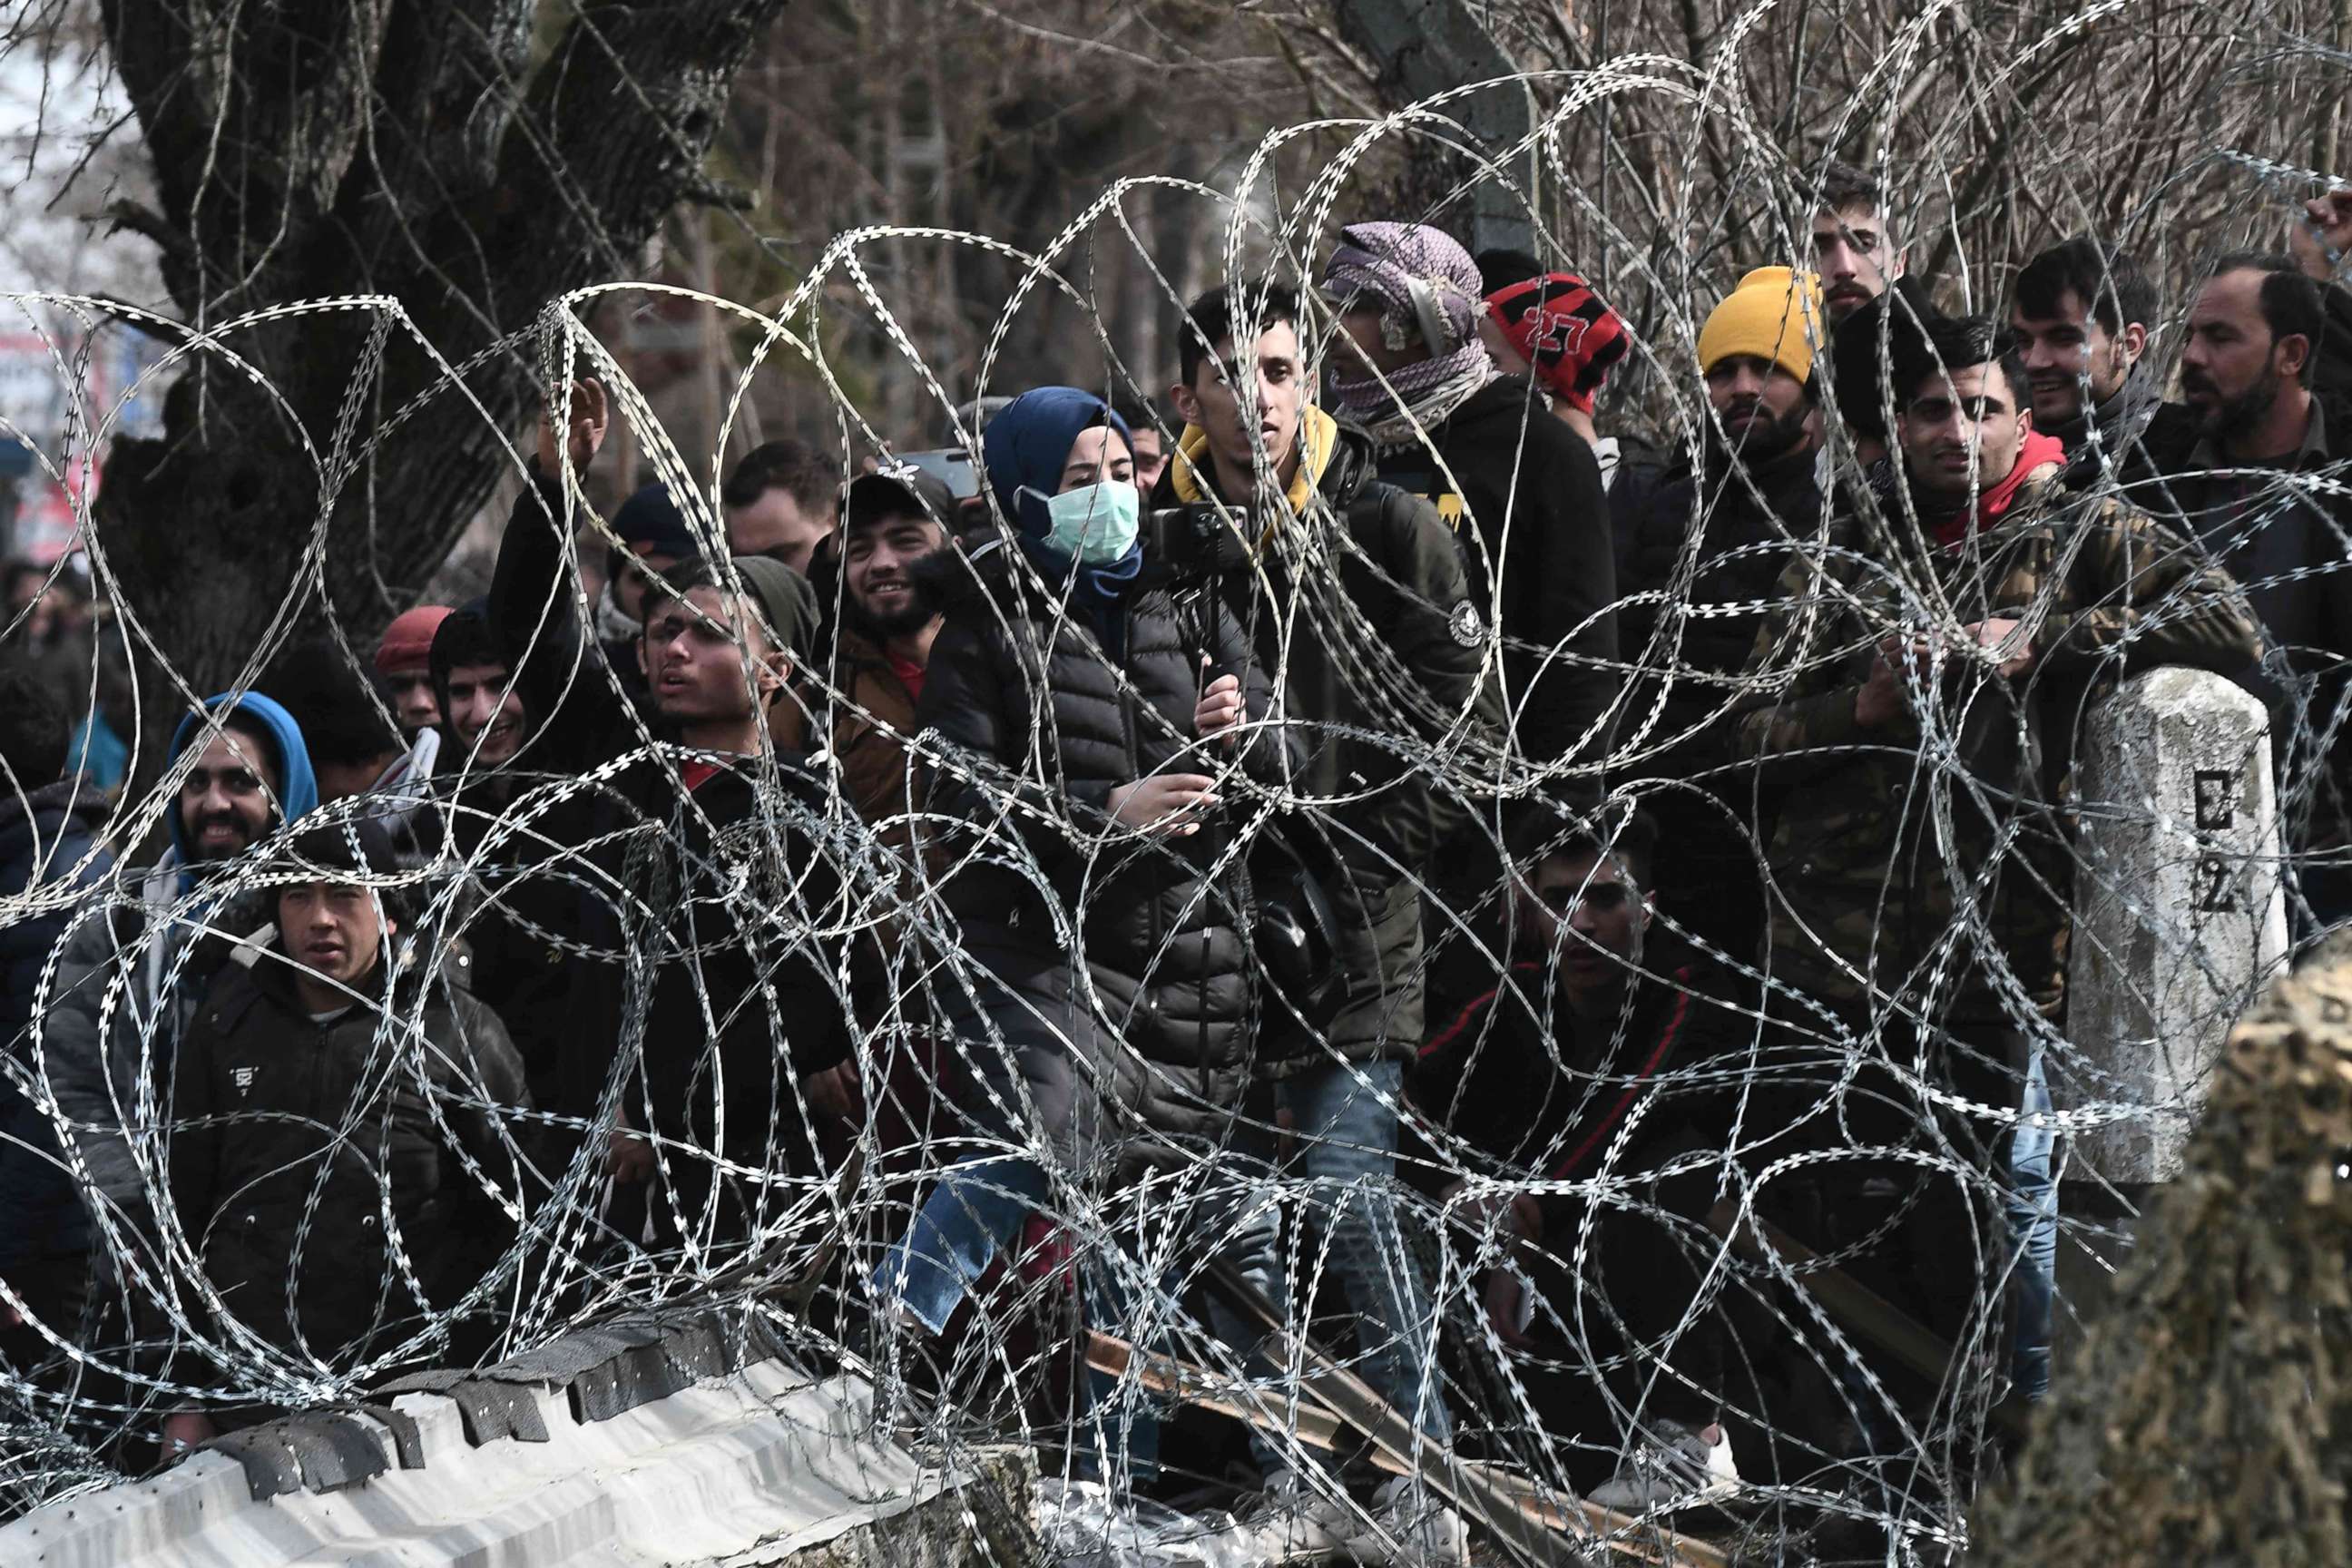 PHOTO: Migrants waiting on the Turkish side of the Greece-Turkey border, March 2, 2020.